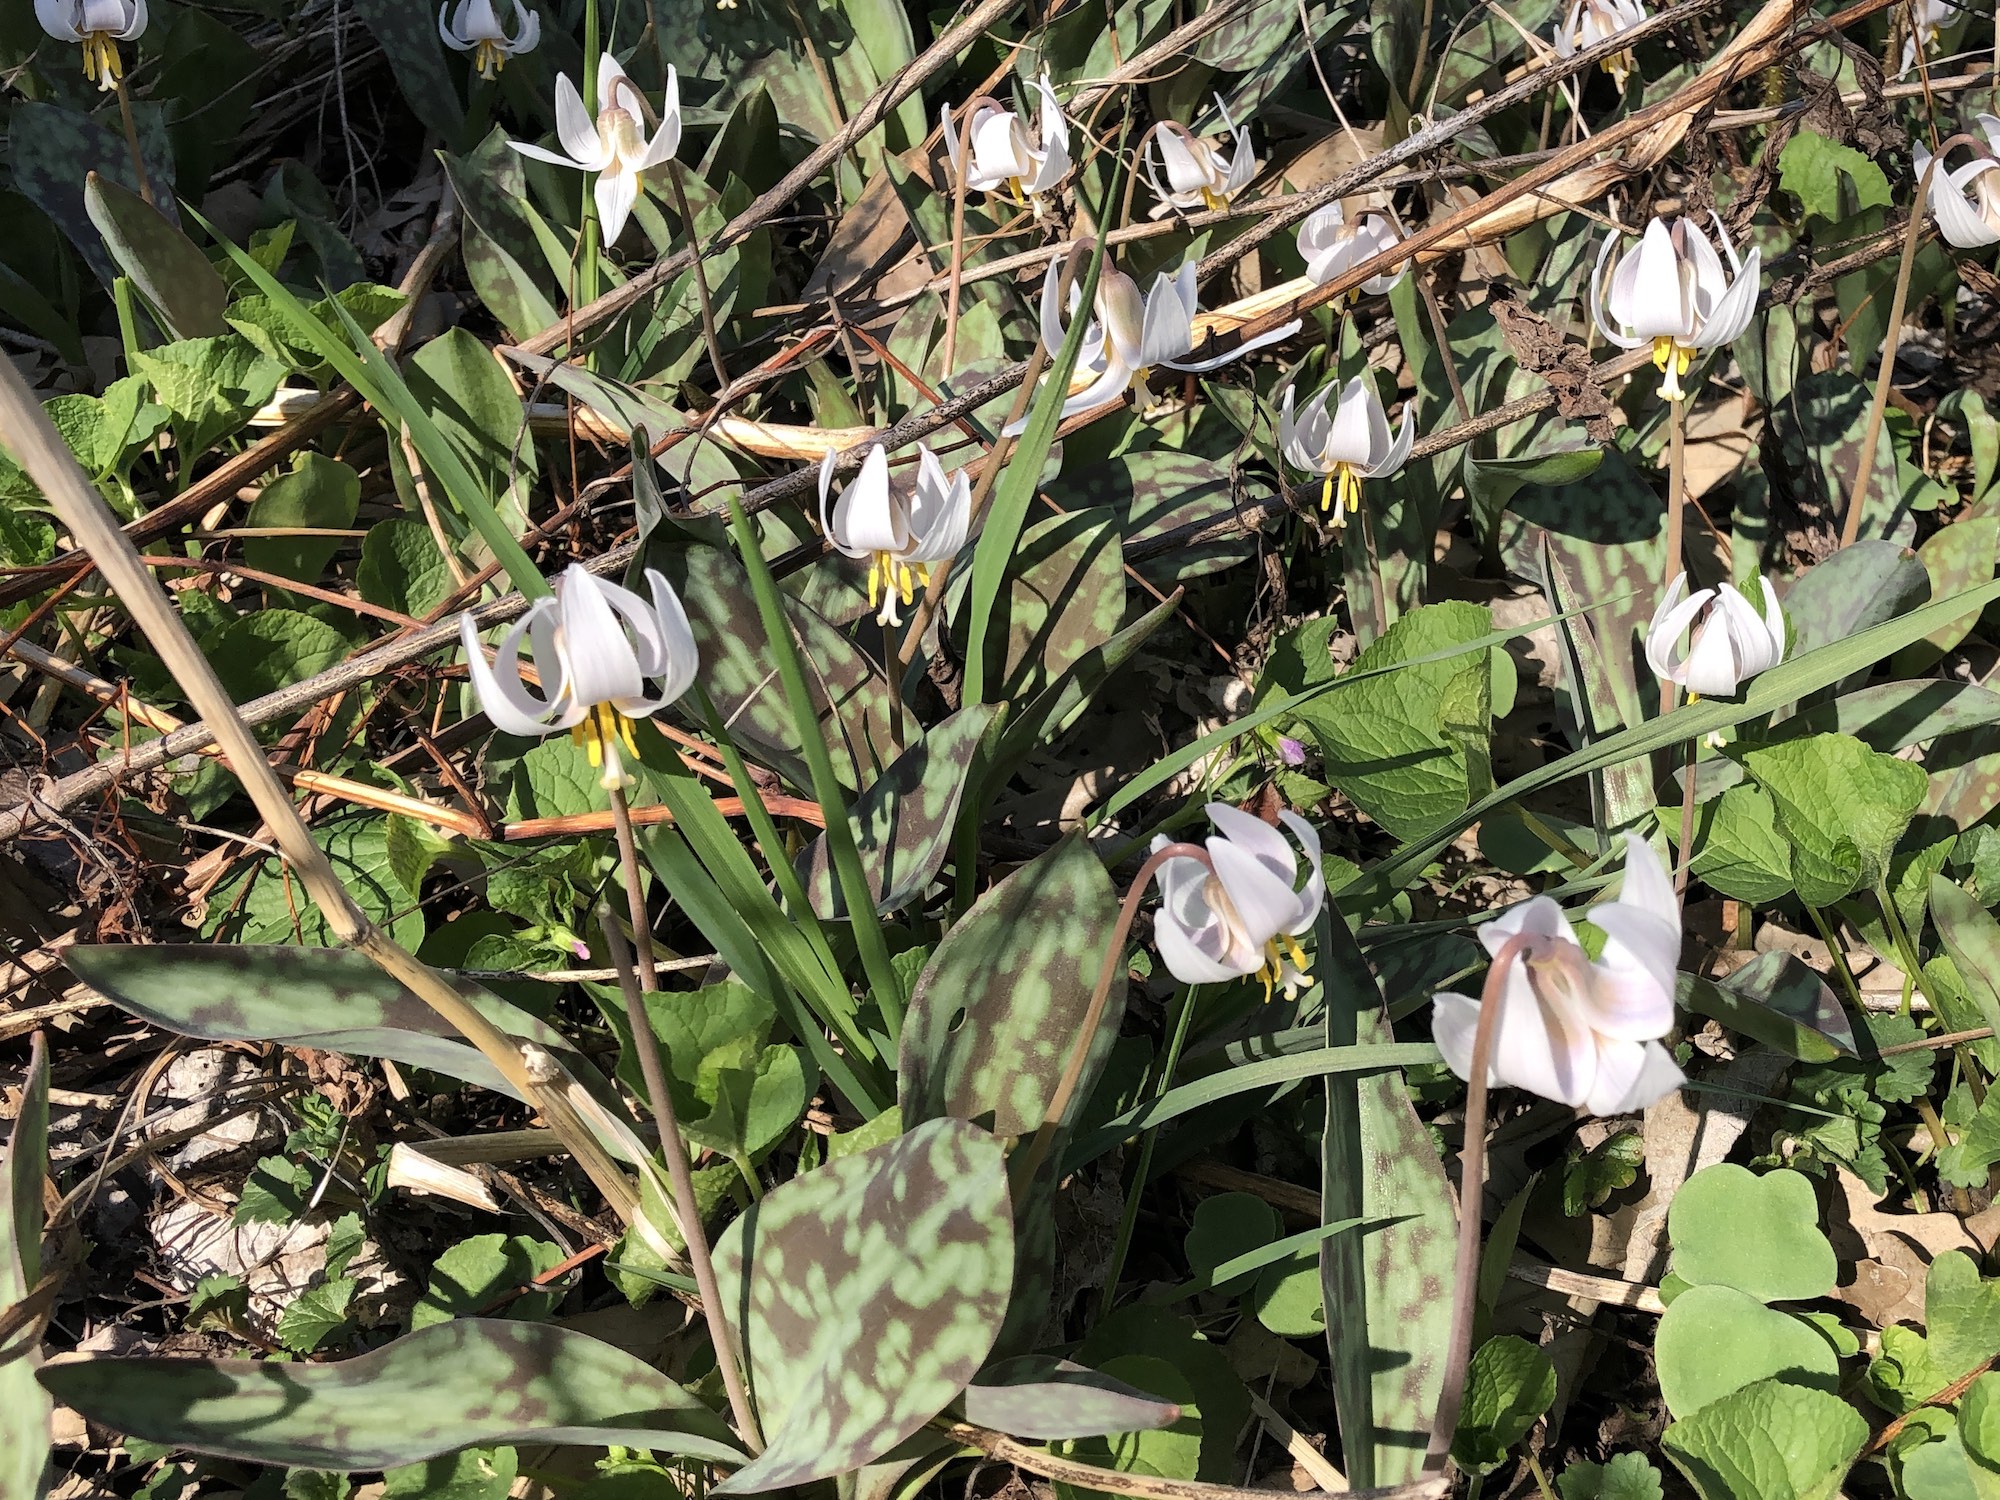 White Trout Lilies photo taken on April 21, 2019 in Madison, Wisconsin in the Oak Savanna and near the Council Ring.